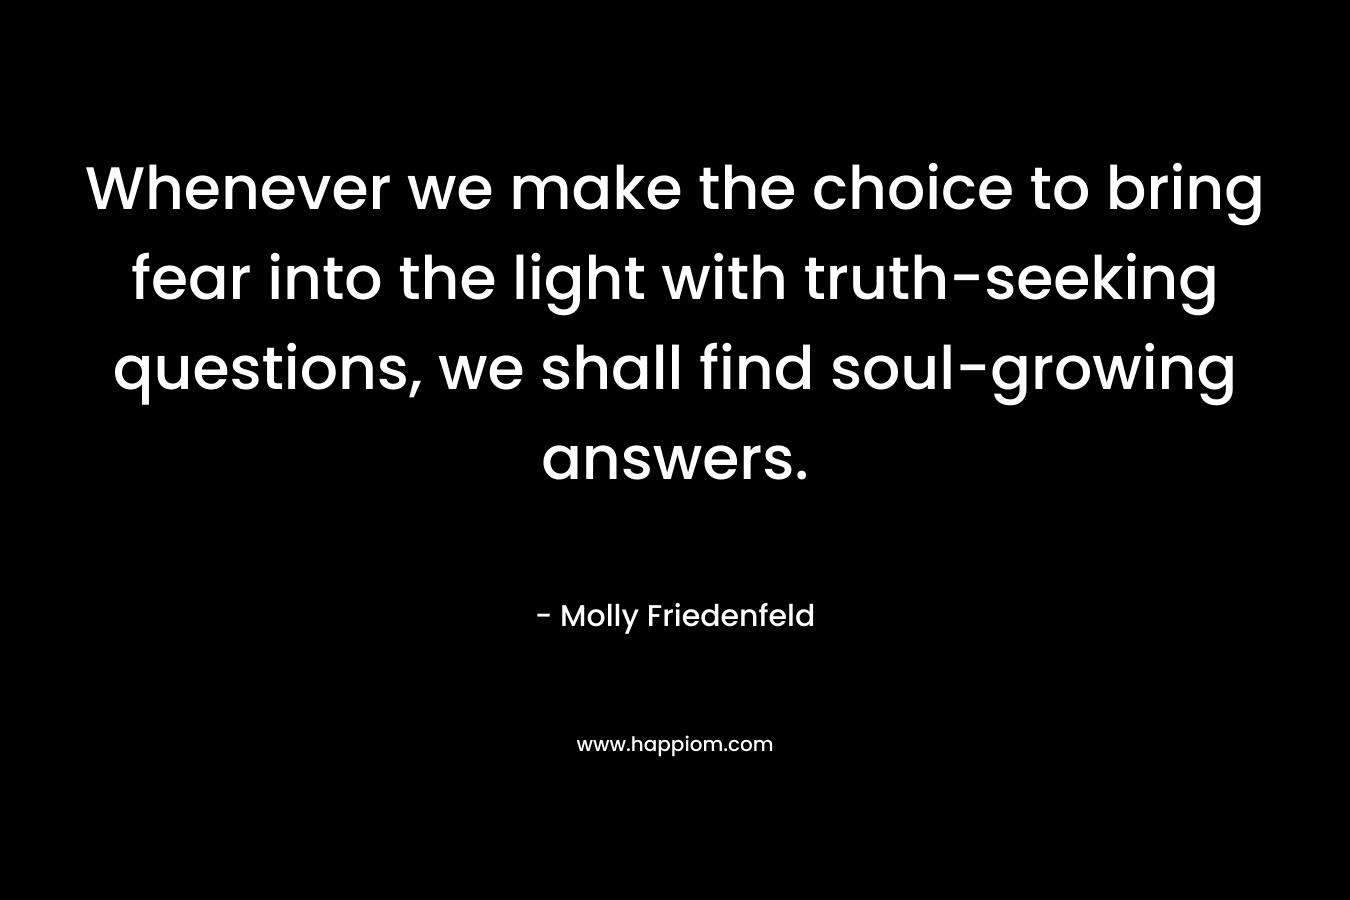 Whenever we make the choice to bring fear into the light with truth-seeking questions, we shall find soul-growing answers.